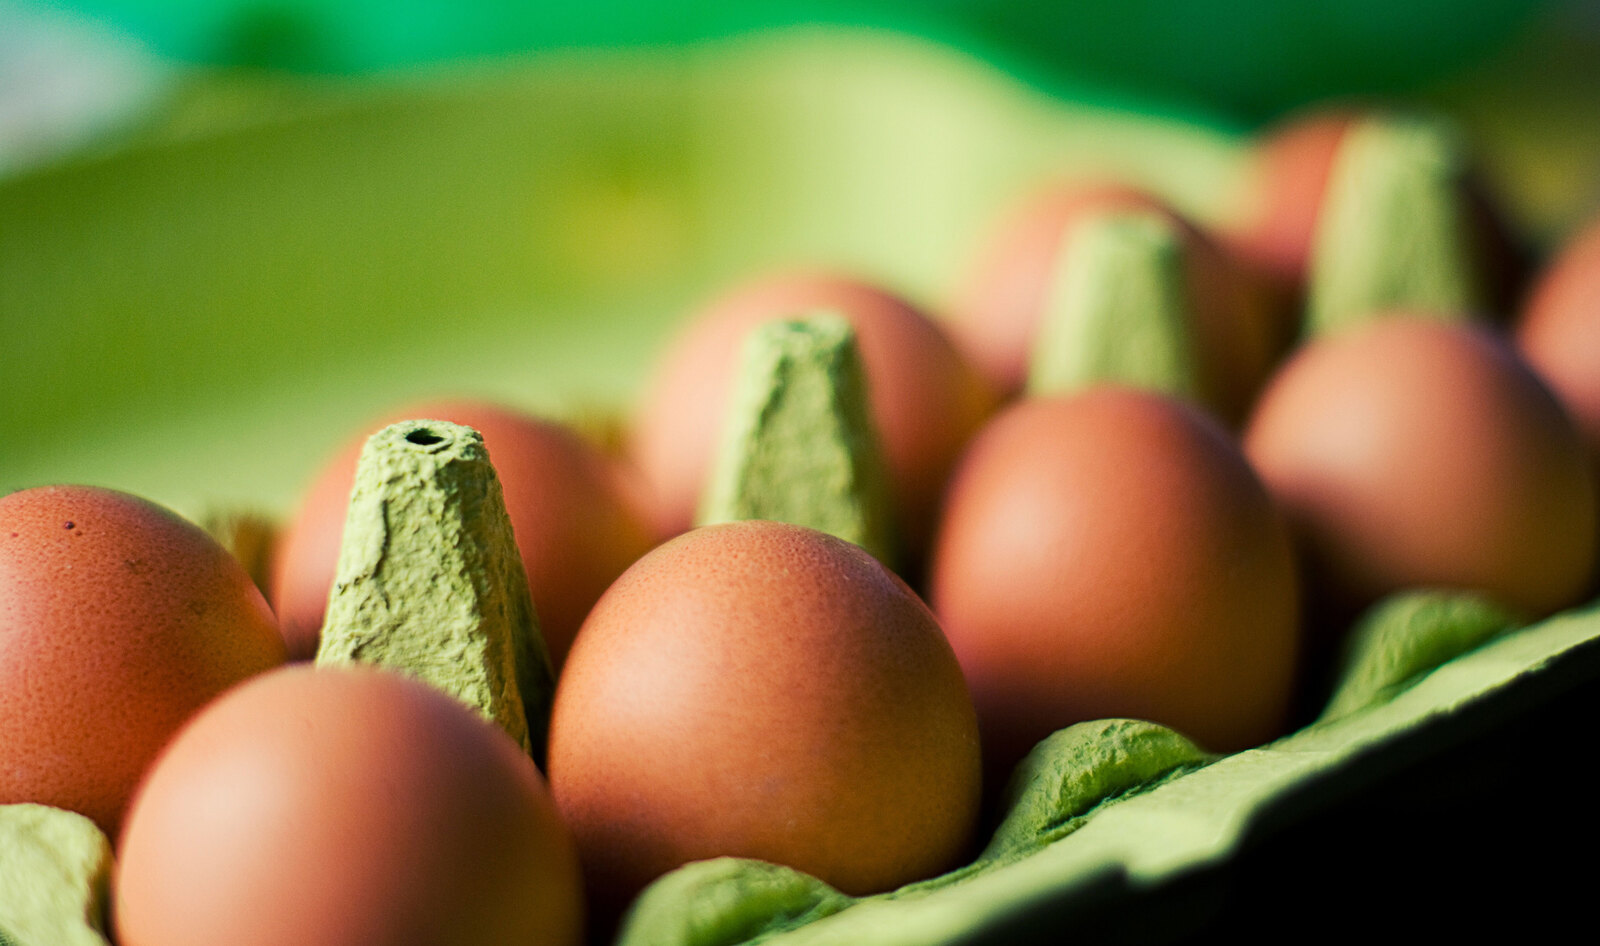 Companies Given “Rotten Eggs Awards” for Making False Cage-Free Egg Promises